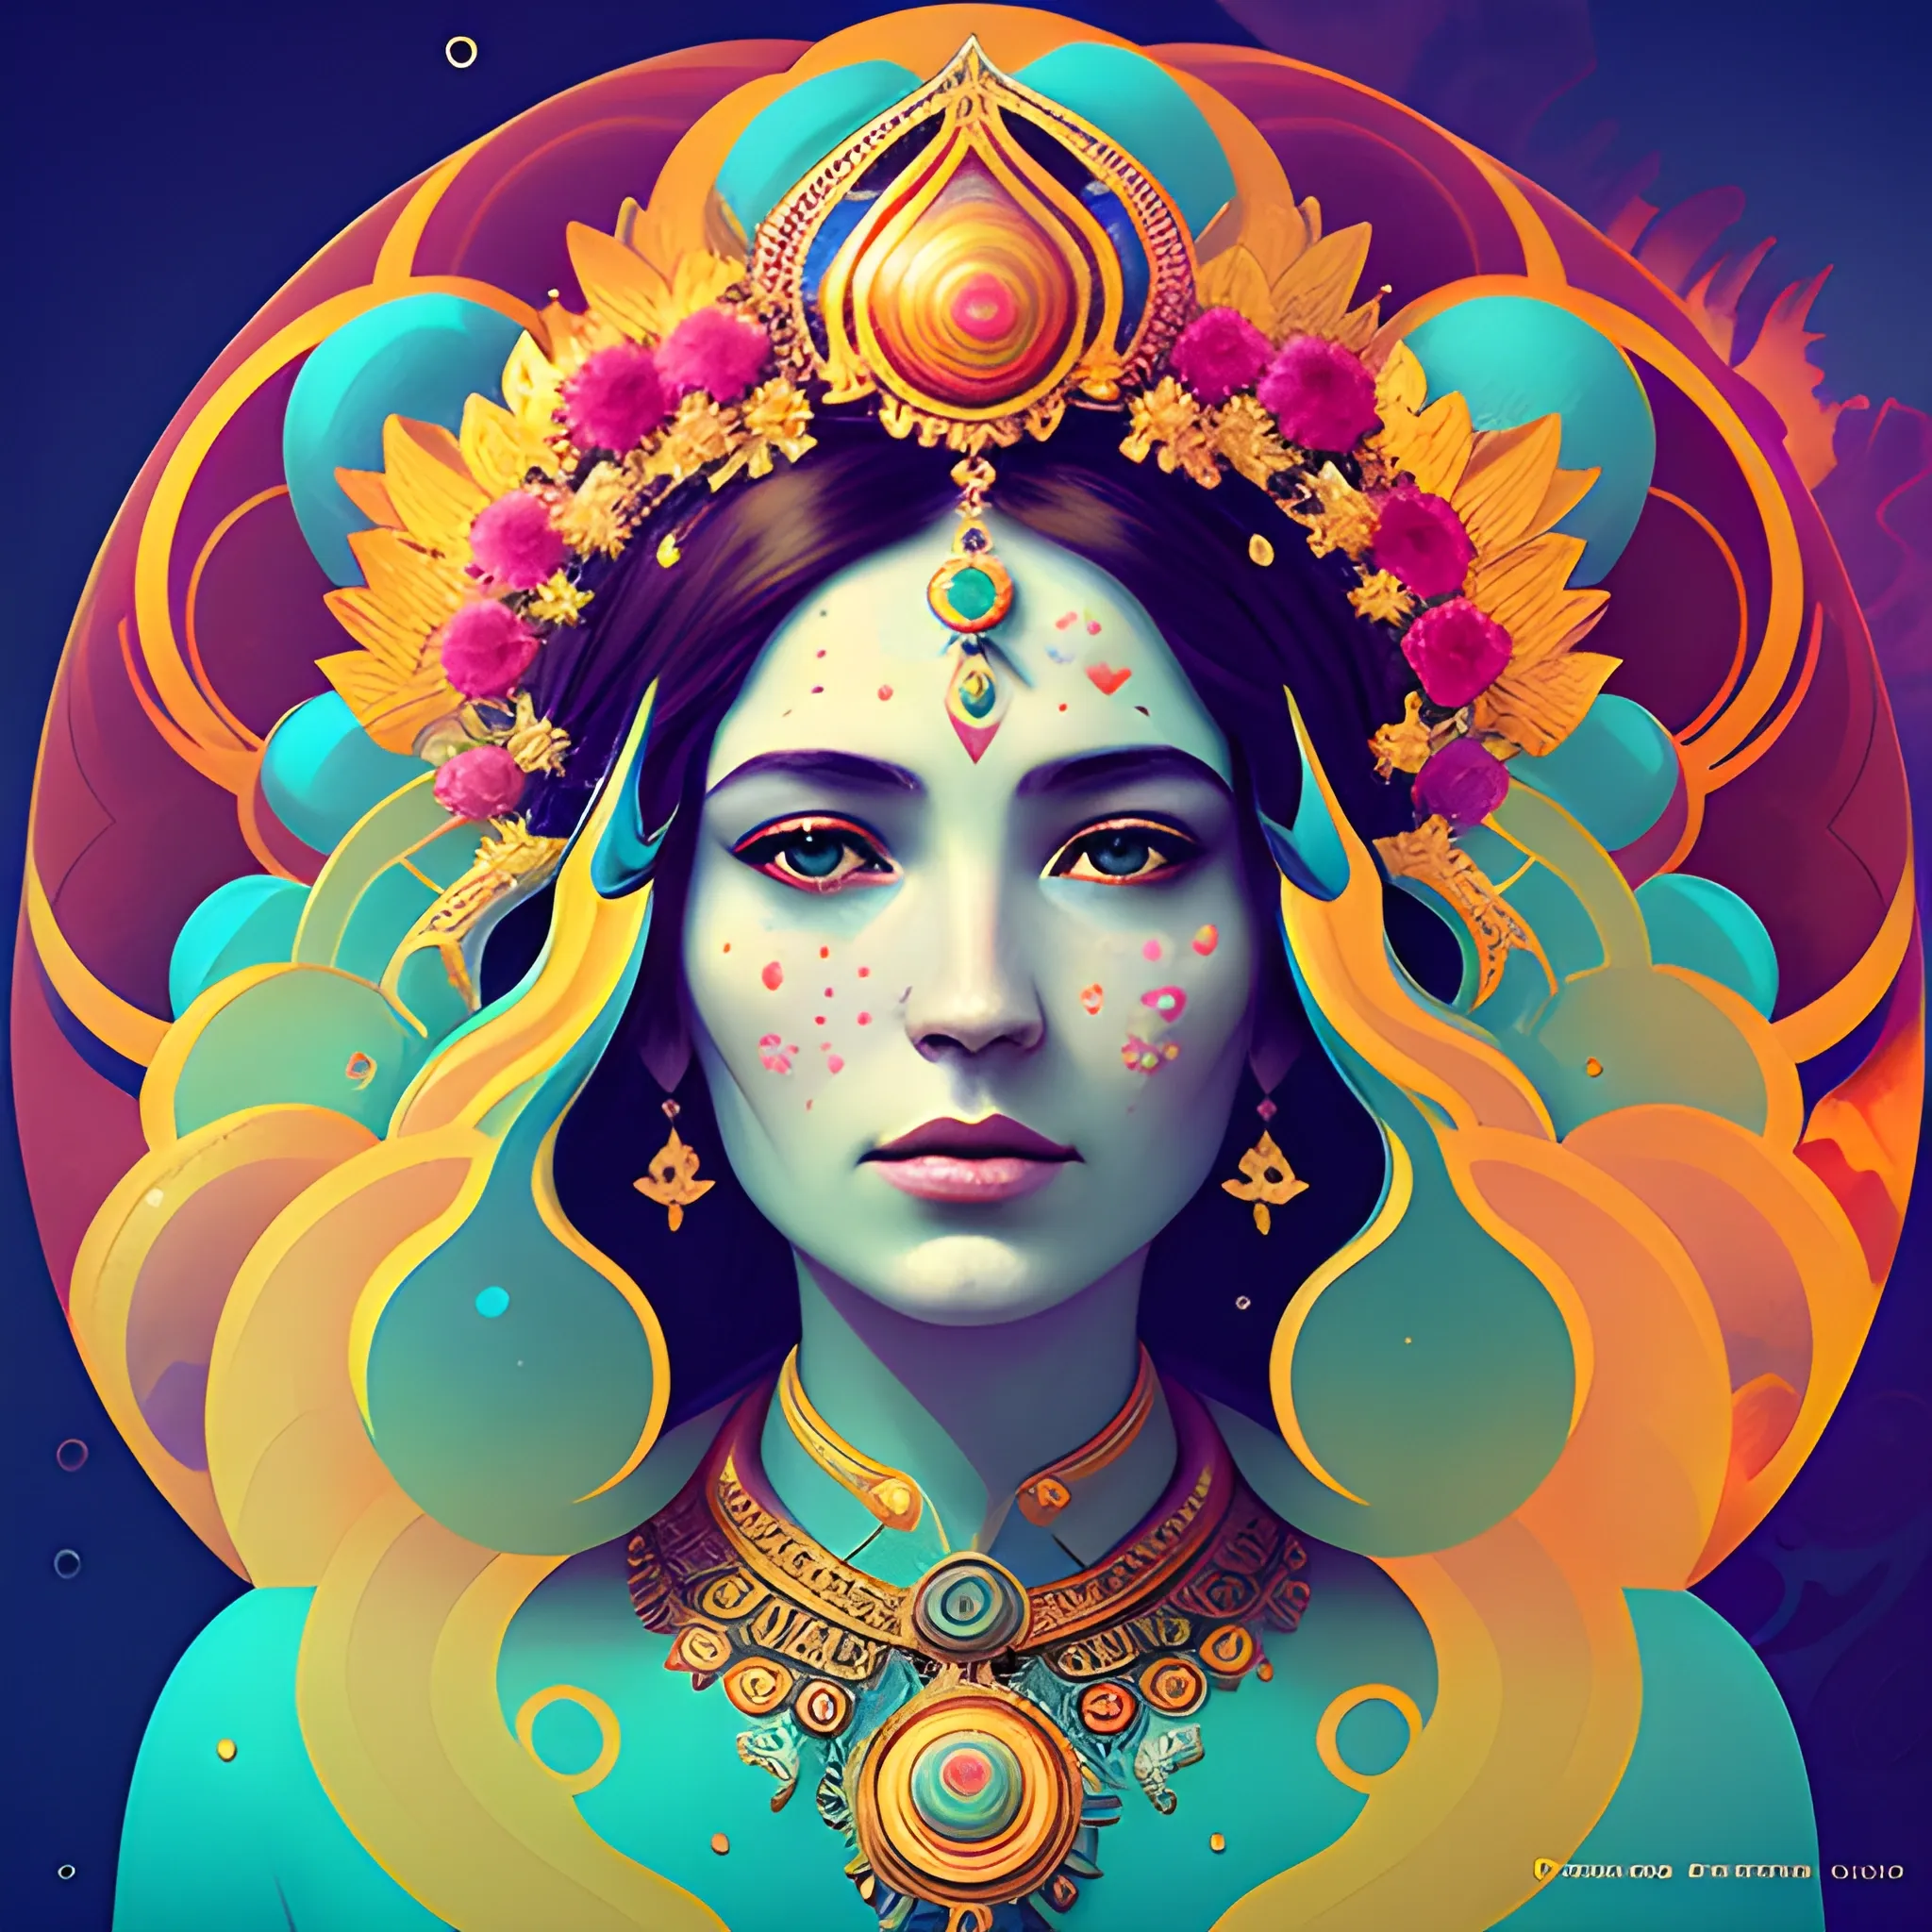 Flowery beautiful face of empress or priestess with gold jewellery, by petros afshar, ross tran, Tom Bagshaw, tom whalen, underwater bubbly psychedelic clouds, Anaglyph 3D lens blur effect